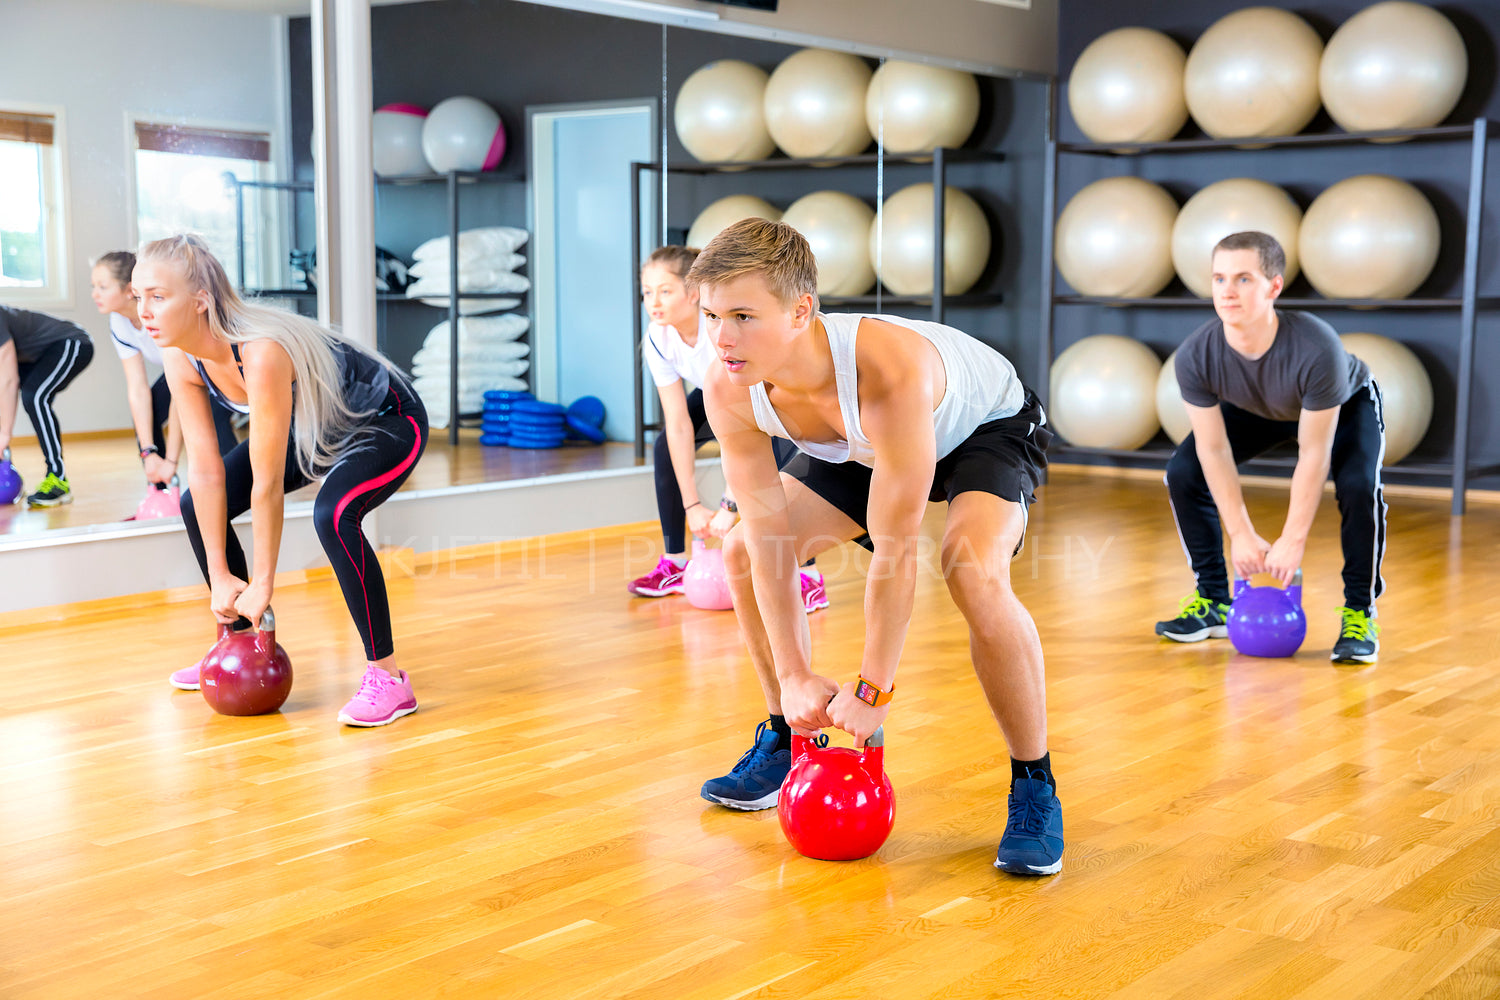 Focused group trains with kettlebells at fitness gym